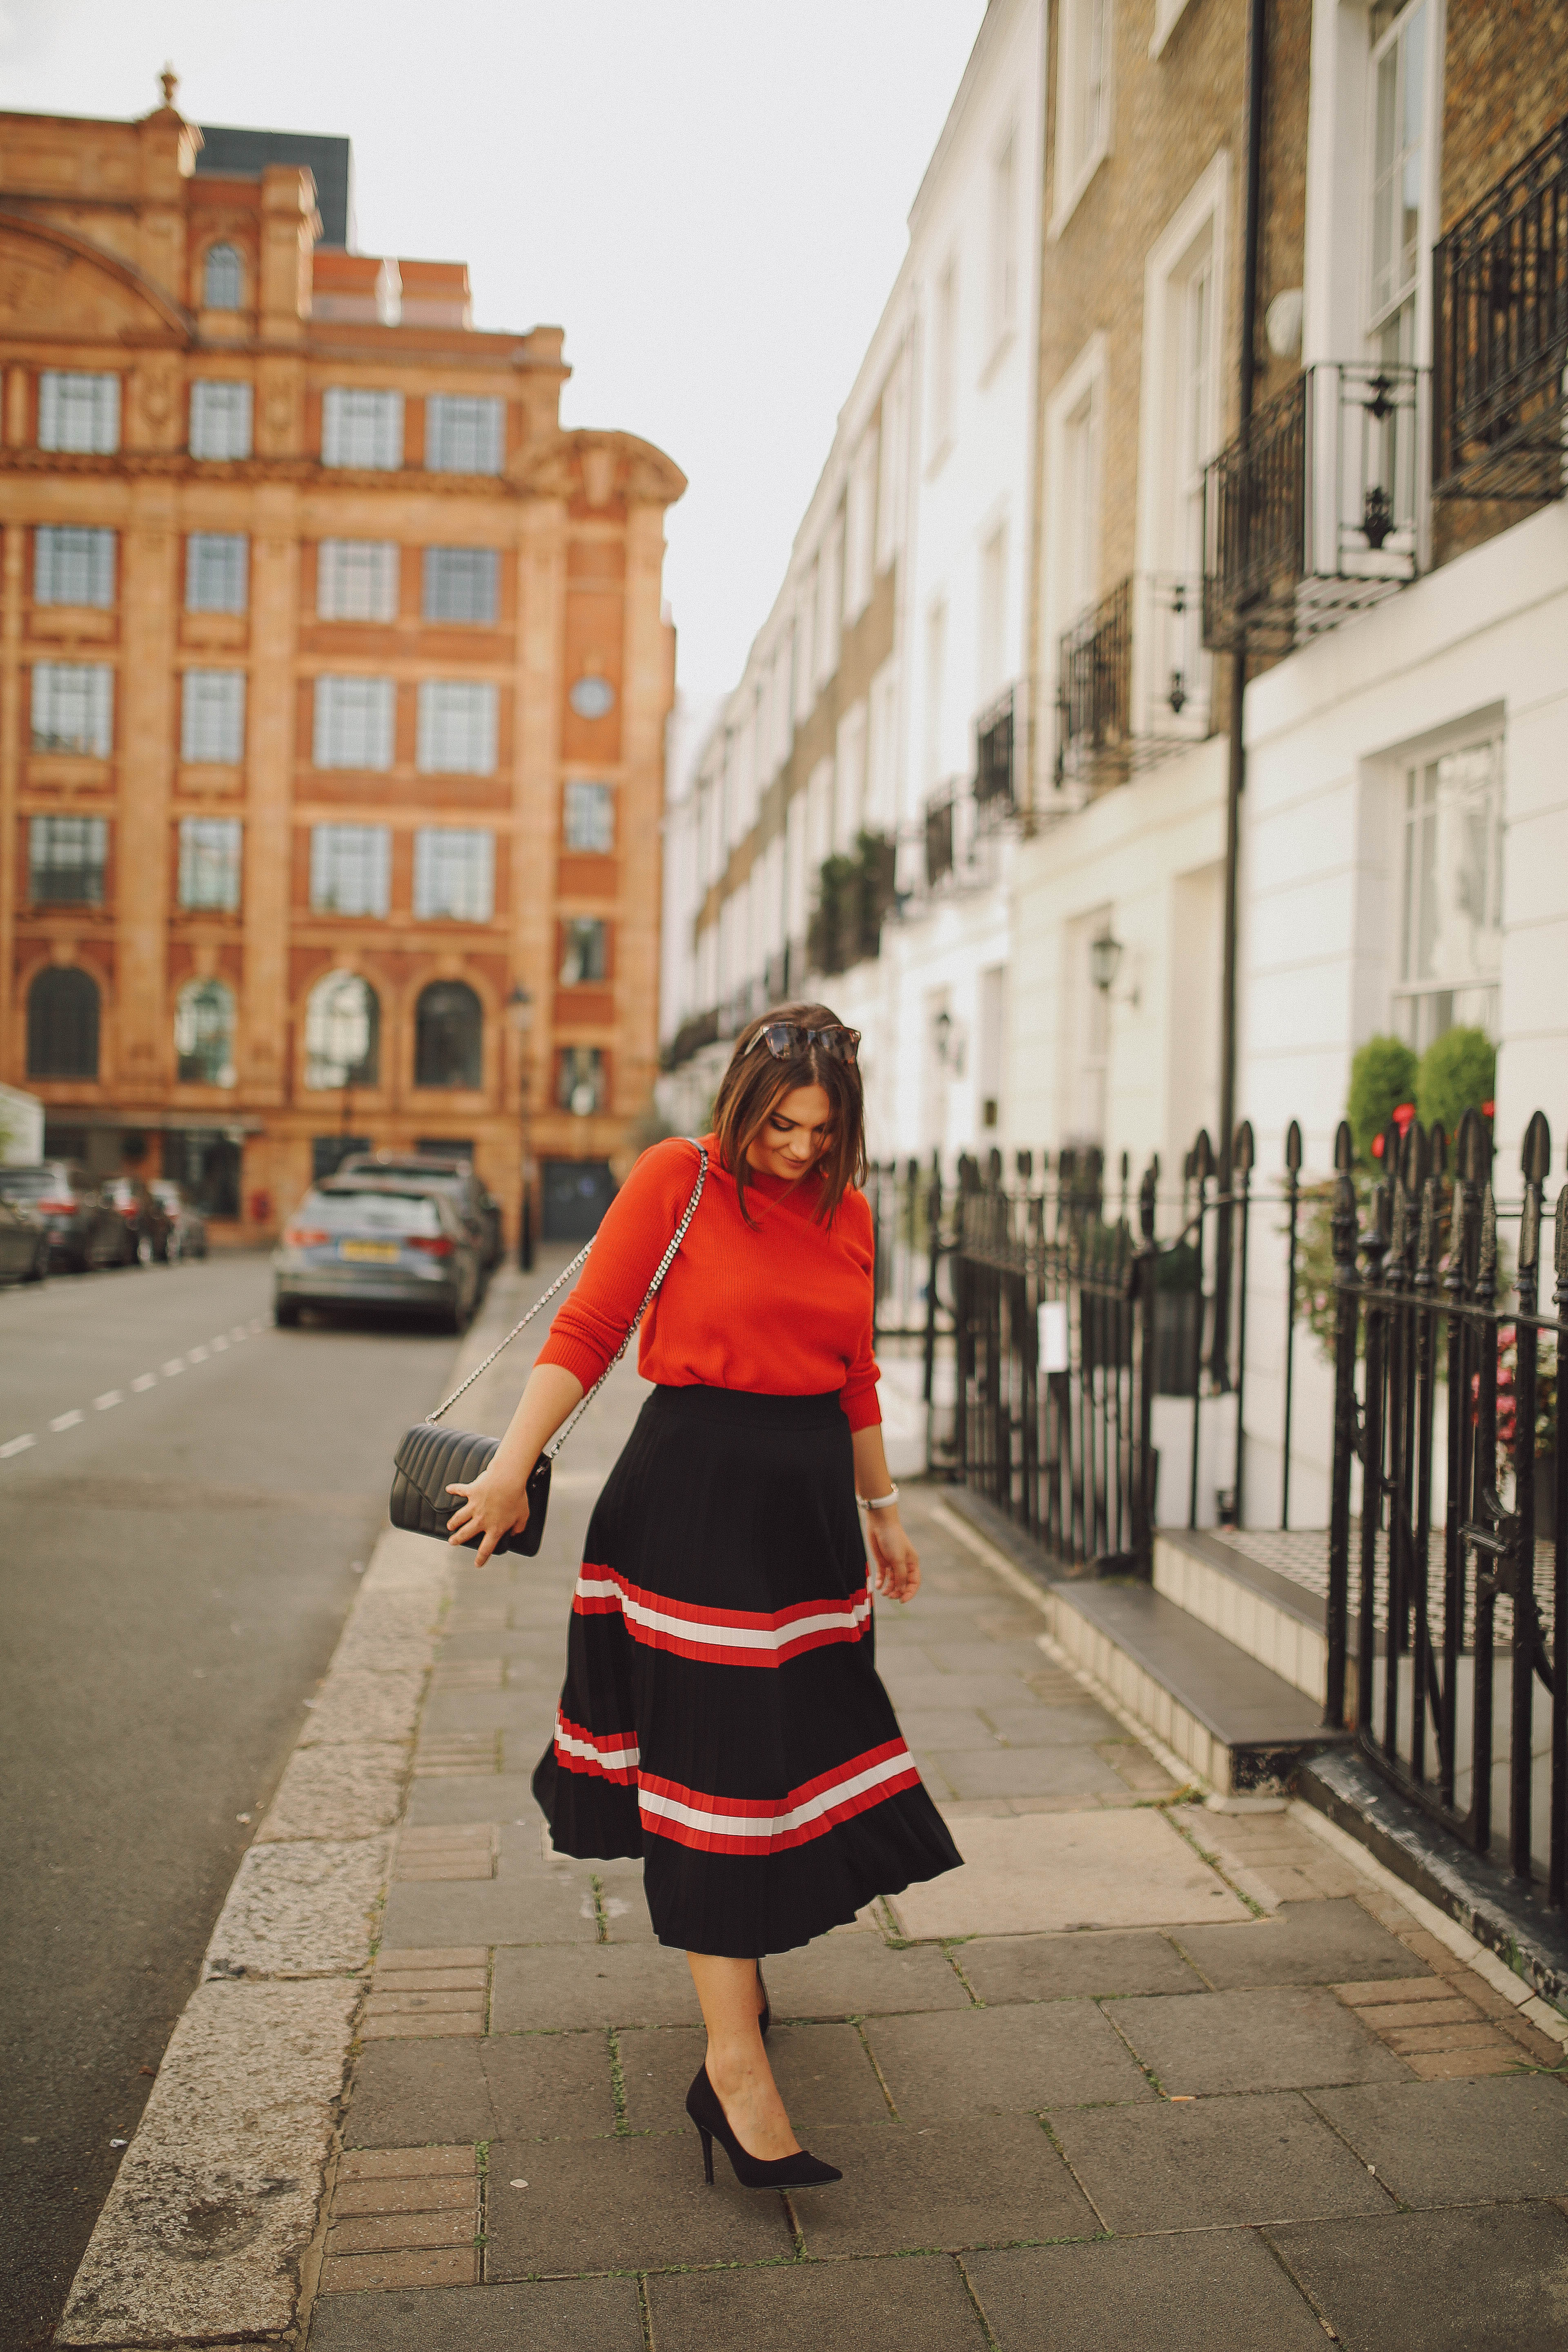 Twirling in a floaty skirt by MANGO | Note by Michelle